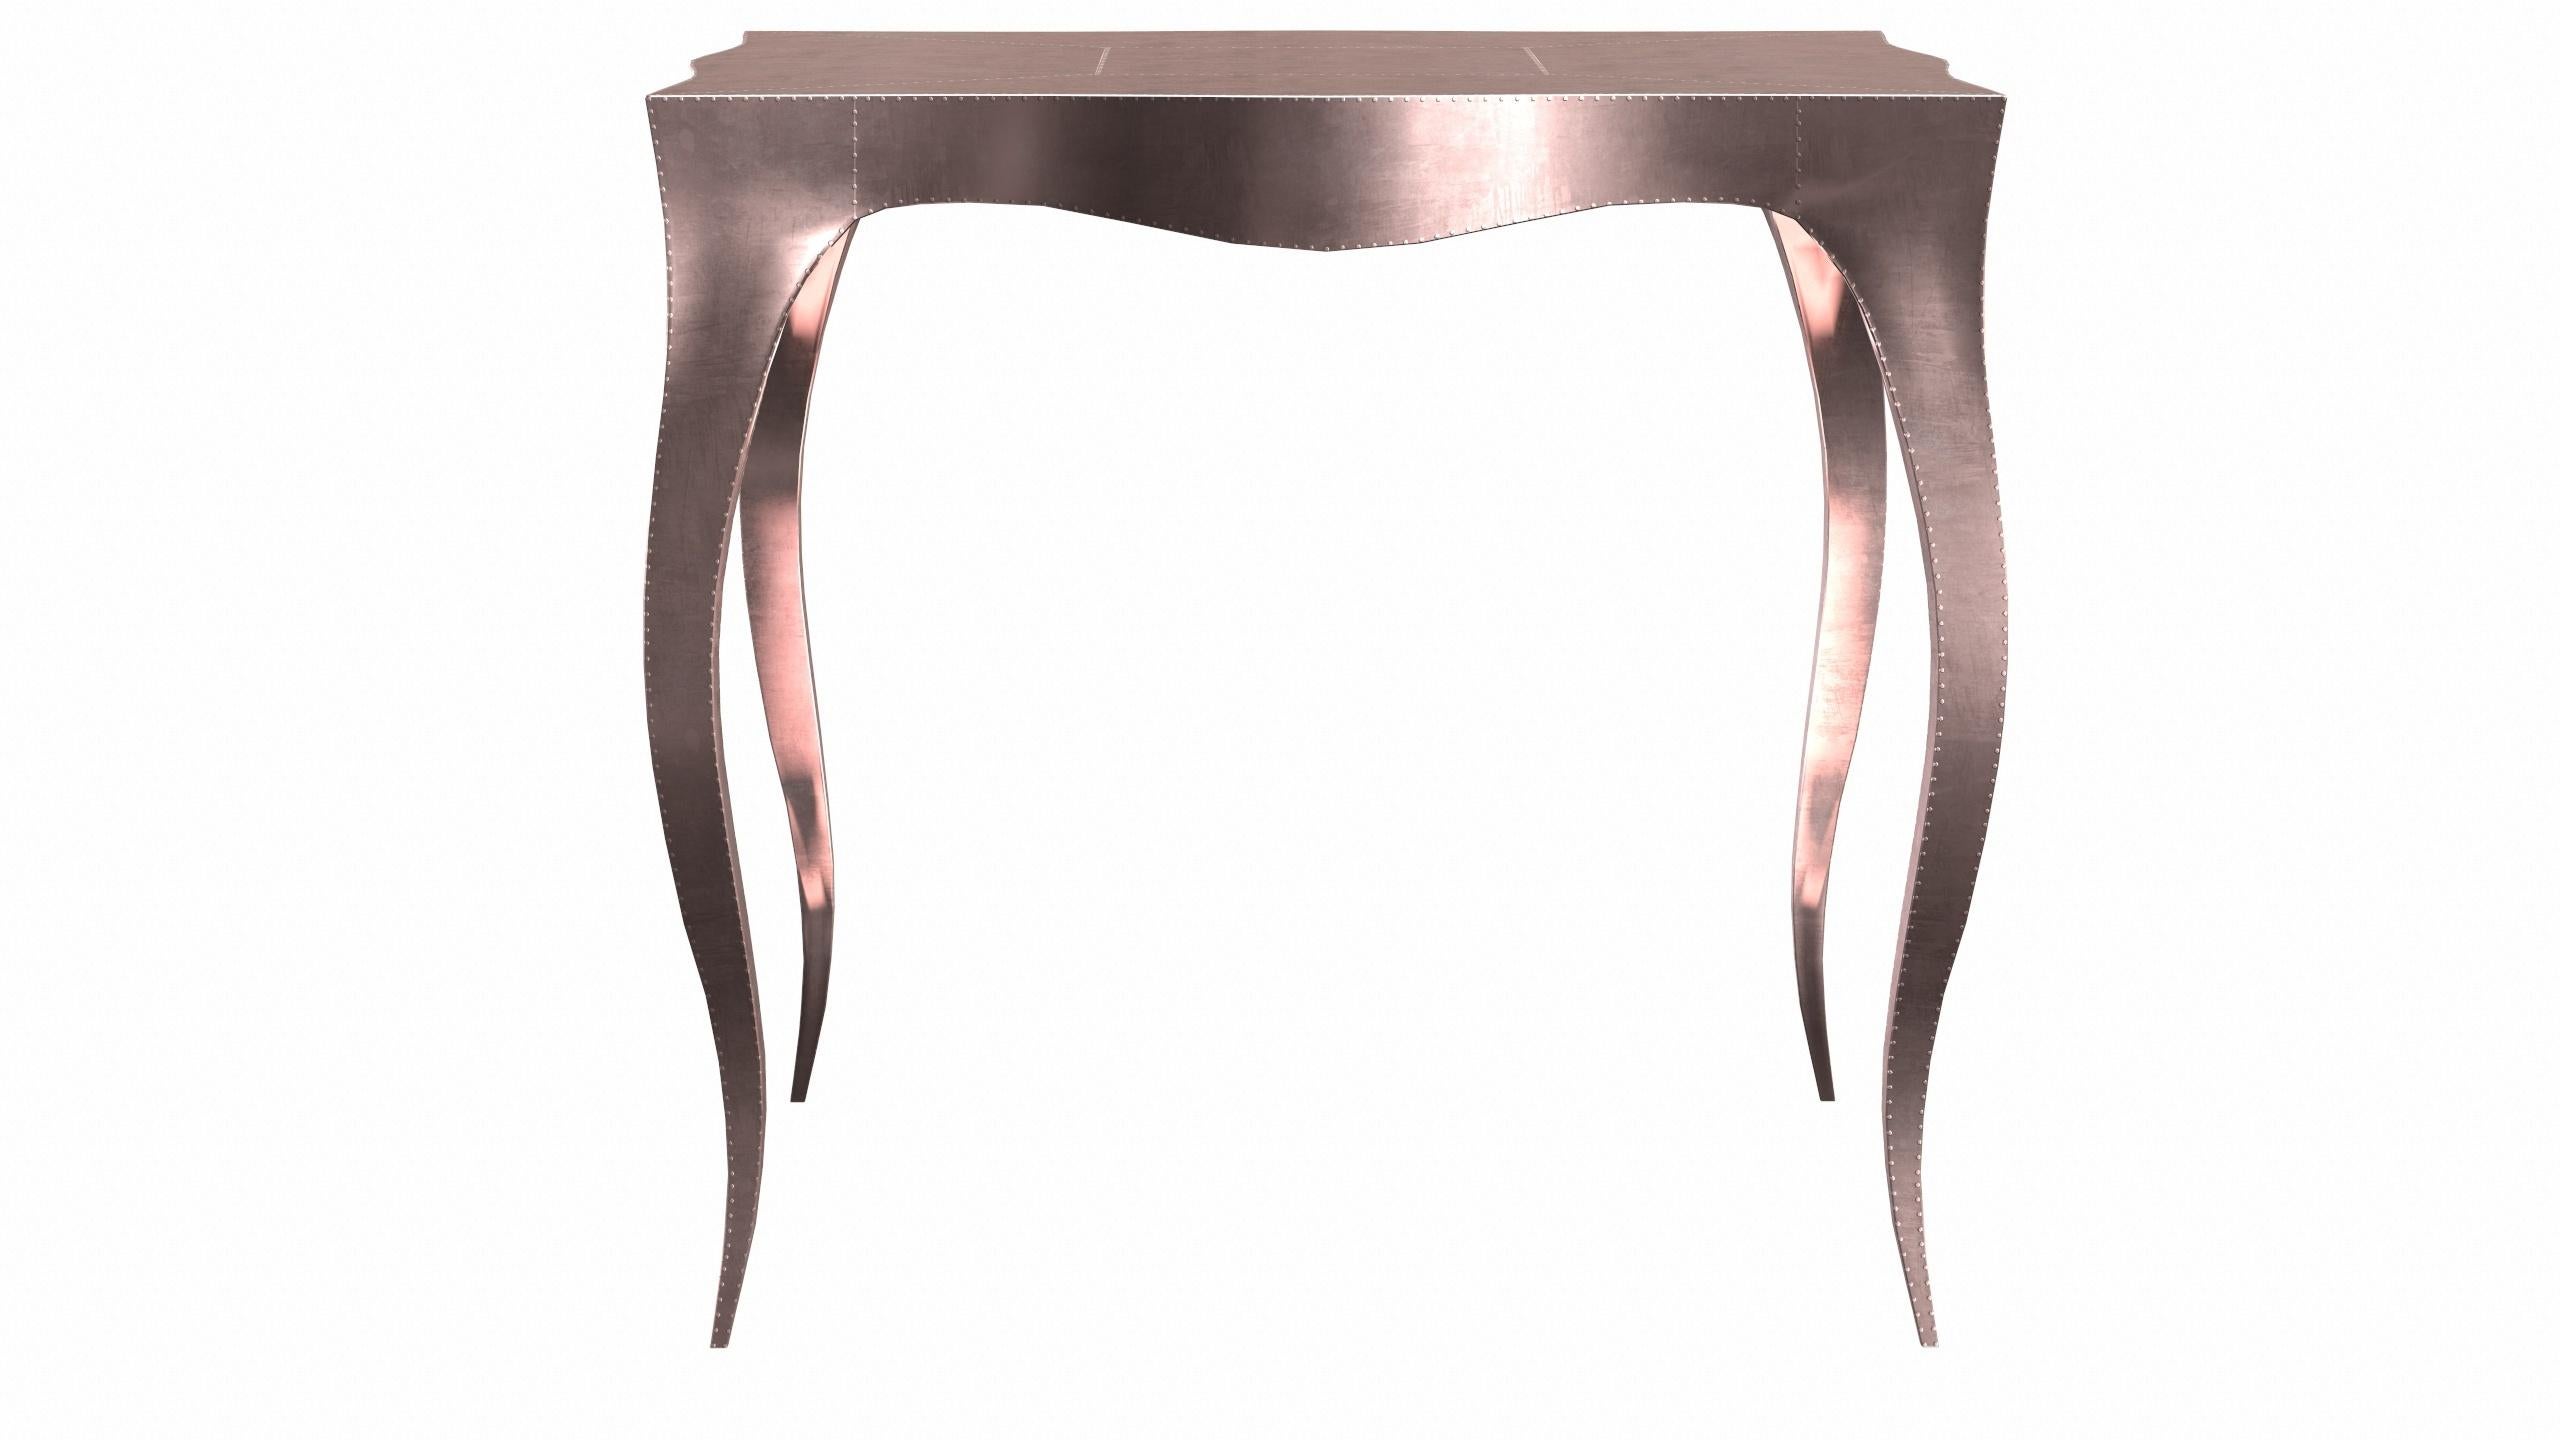 American Louise Art Deco Nesting Tables and Stacking Tables Smooth Copper by Paul Mathieu For Sale